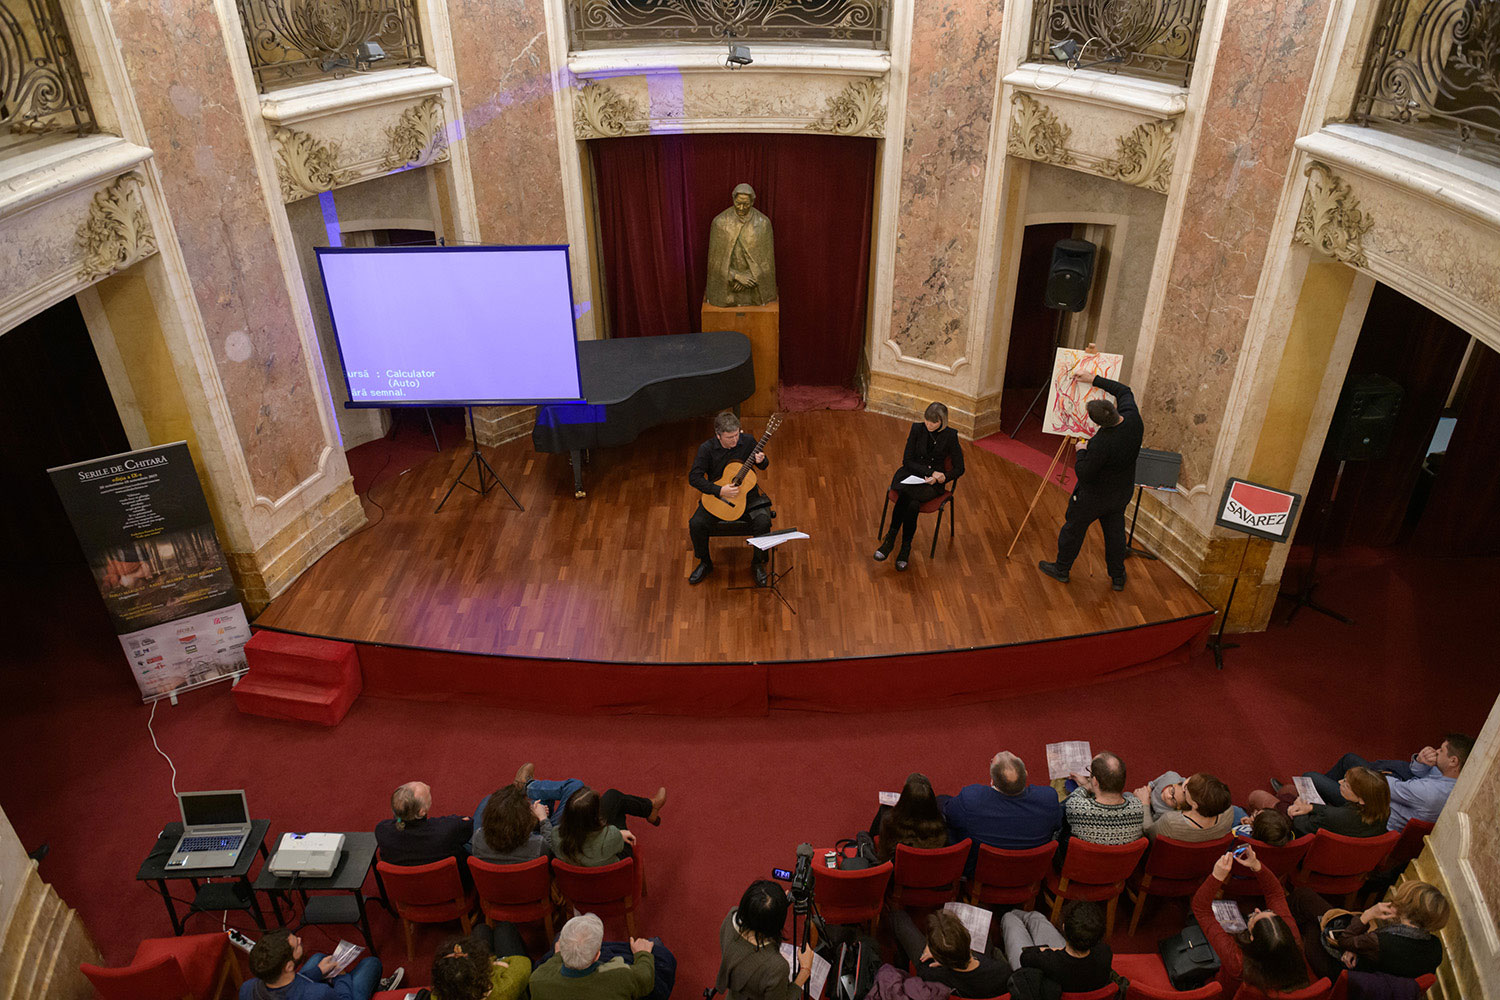 Jorge Luis Borges, musica de los seres imaginarios concert, live visuals, drawing, performance at George Enescu National Museum, Bucharest with Costin Soare and Kitharalogos